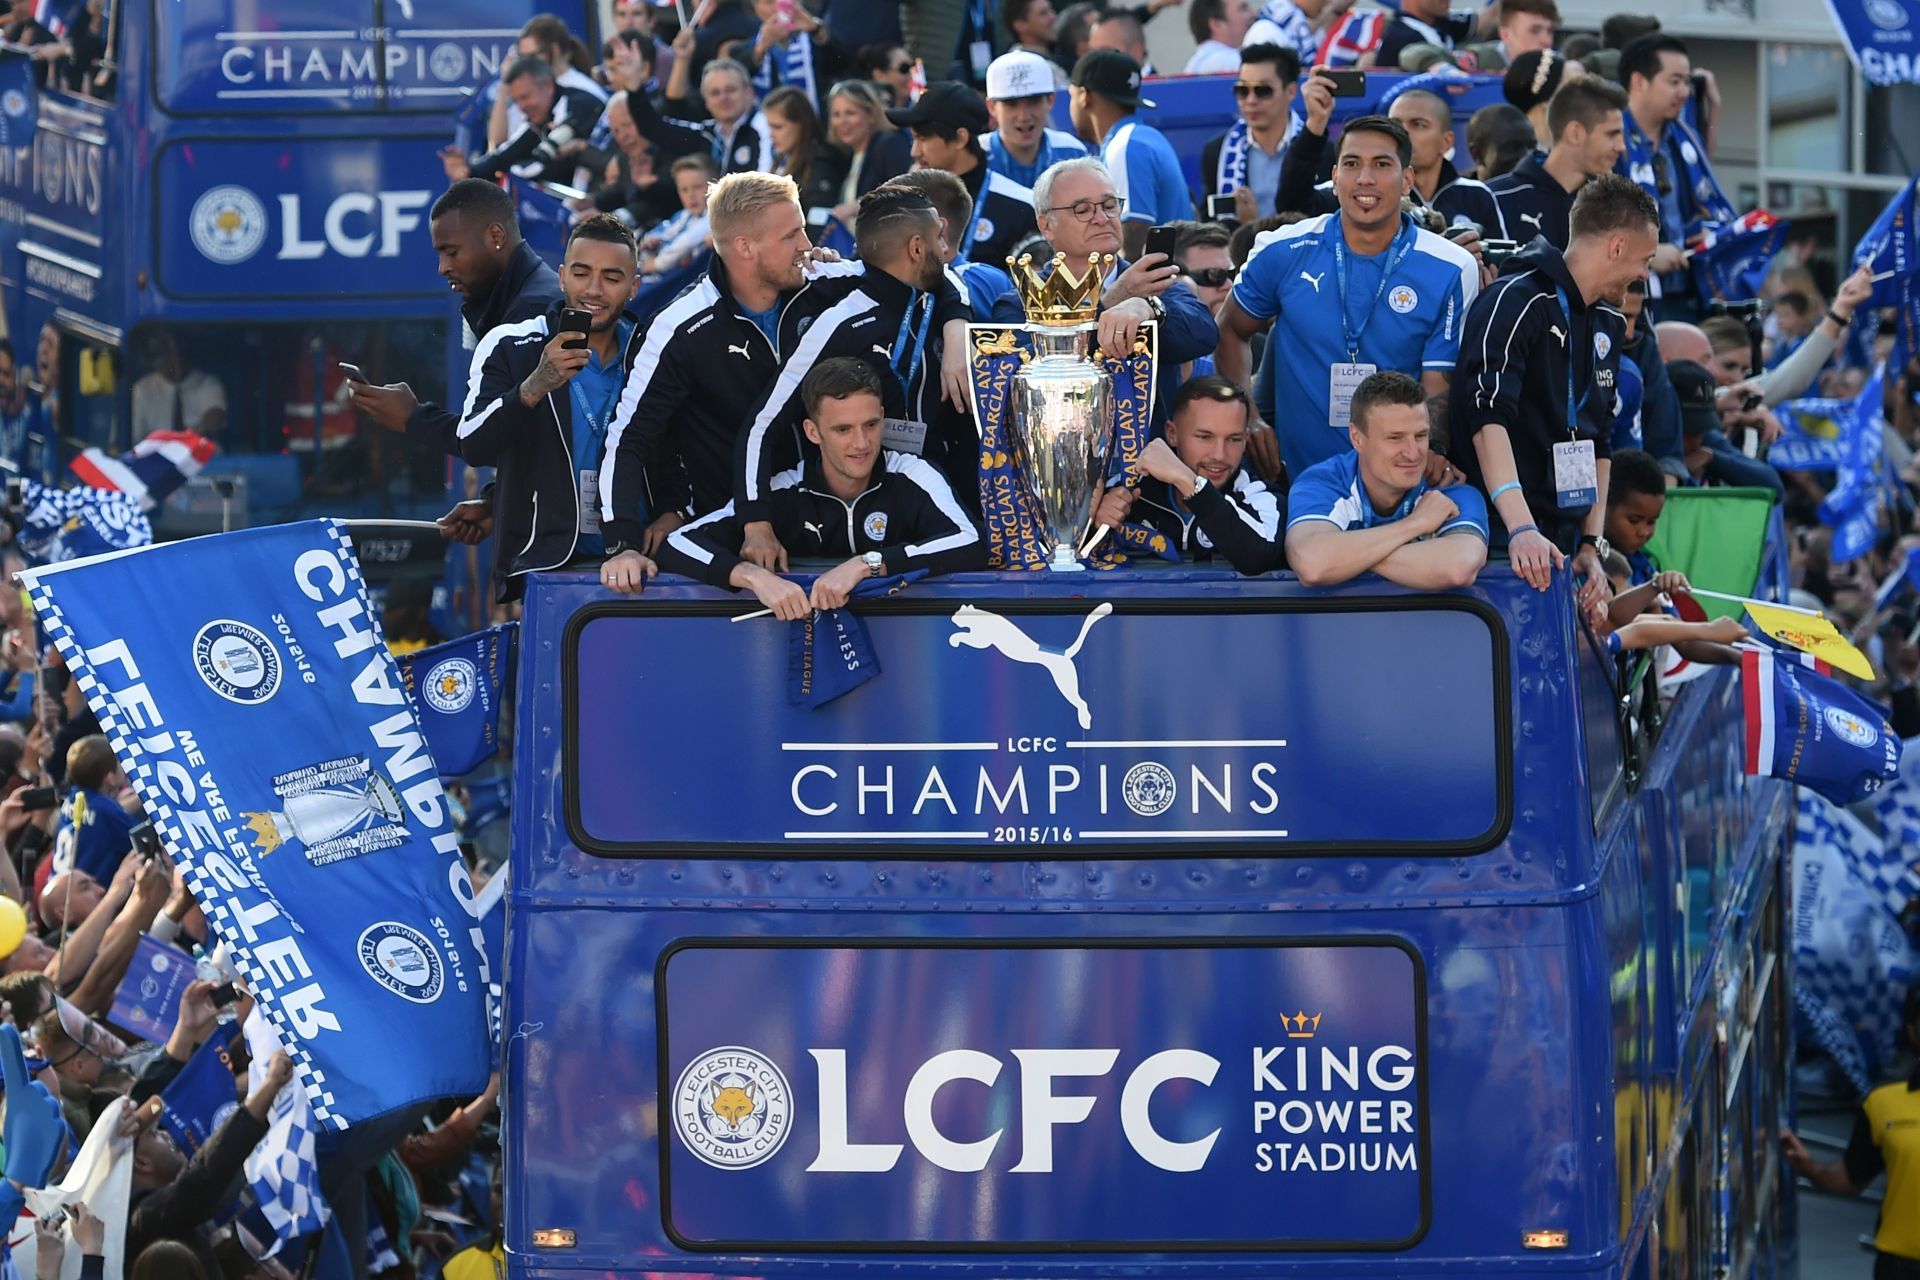 Leicester City victory parade after their win in the 2015-16 Premier League season